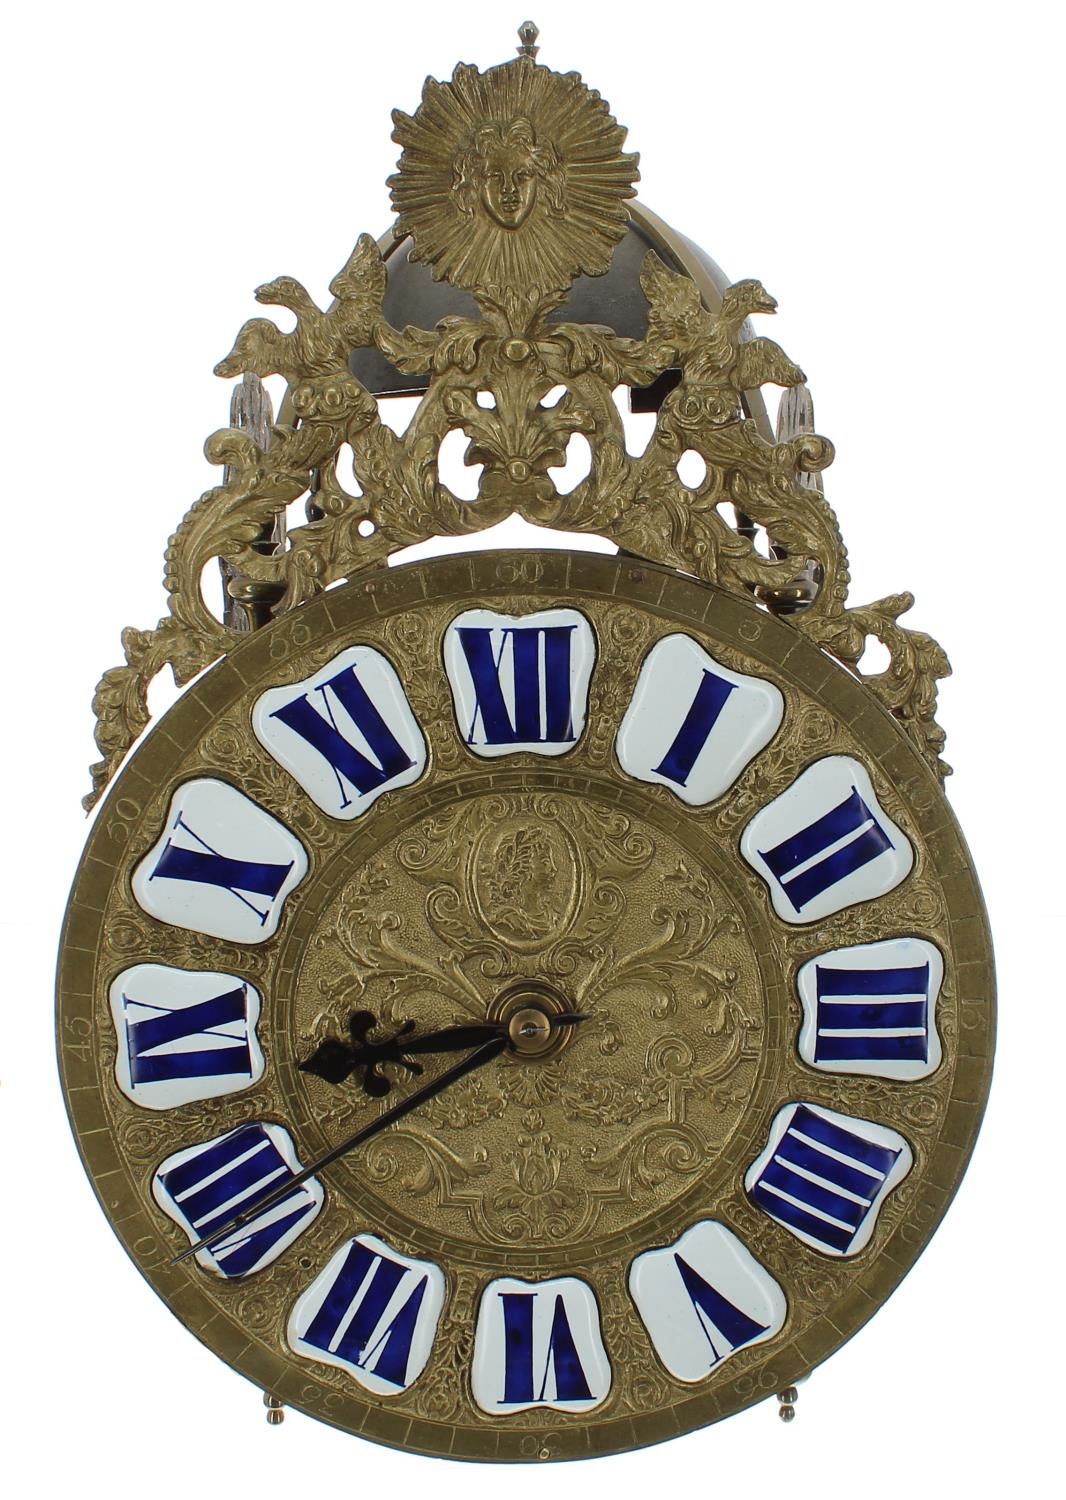 French Louis XIV verge brass lantern clock, signed Anne Clement á Paris on the left hand side of the